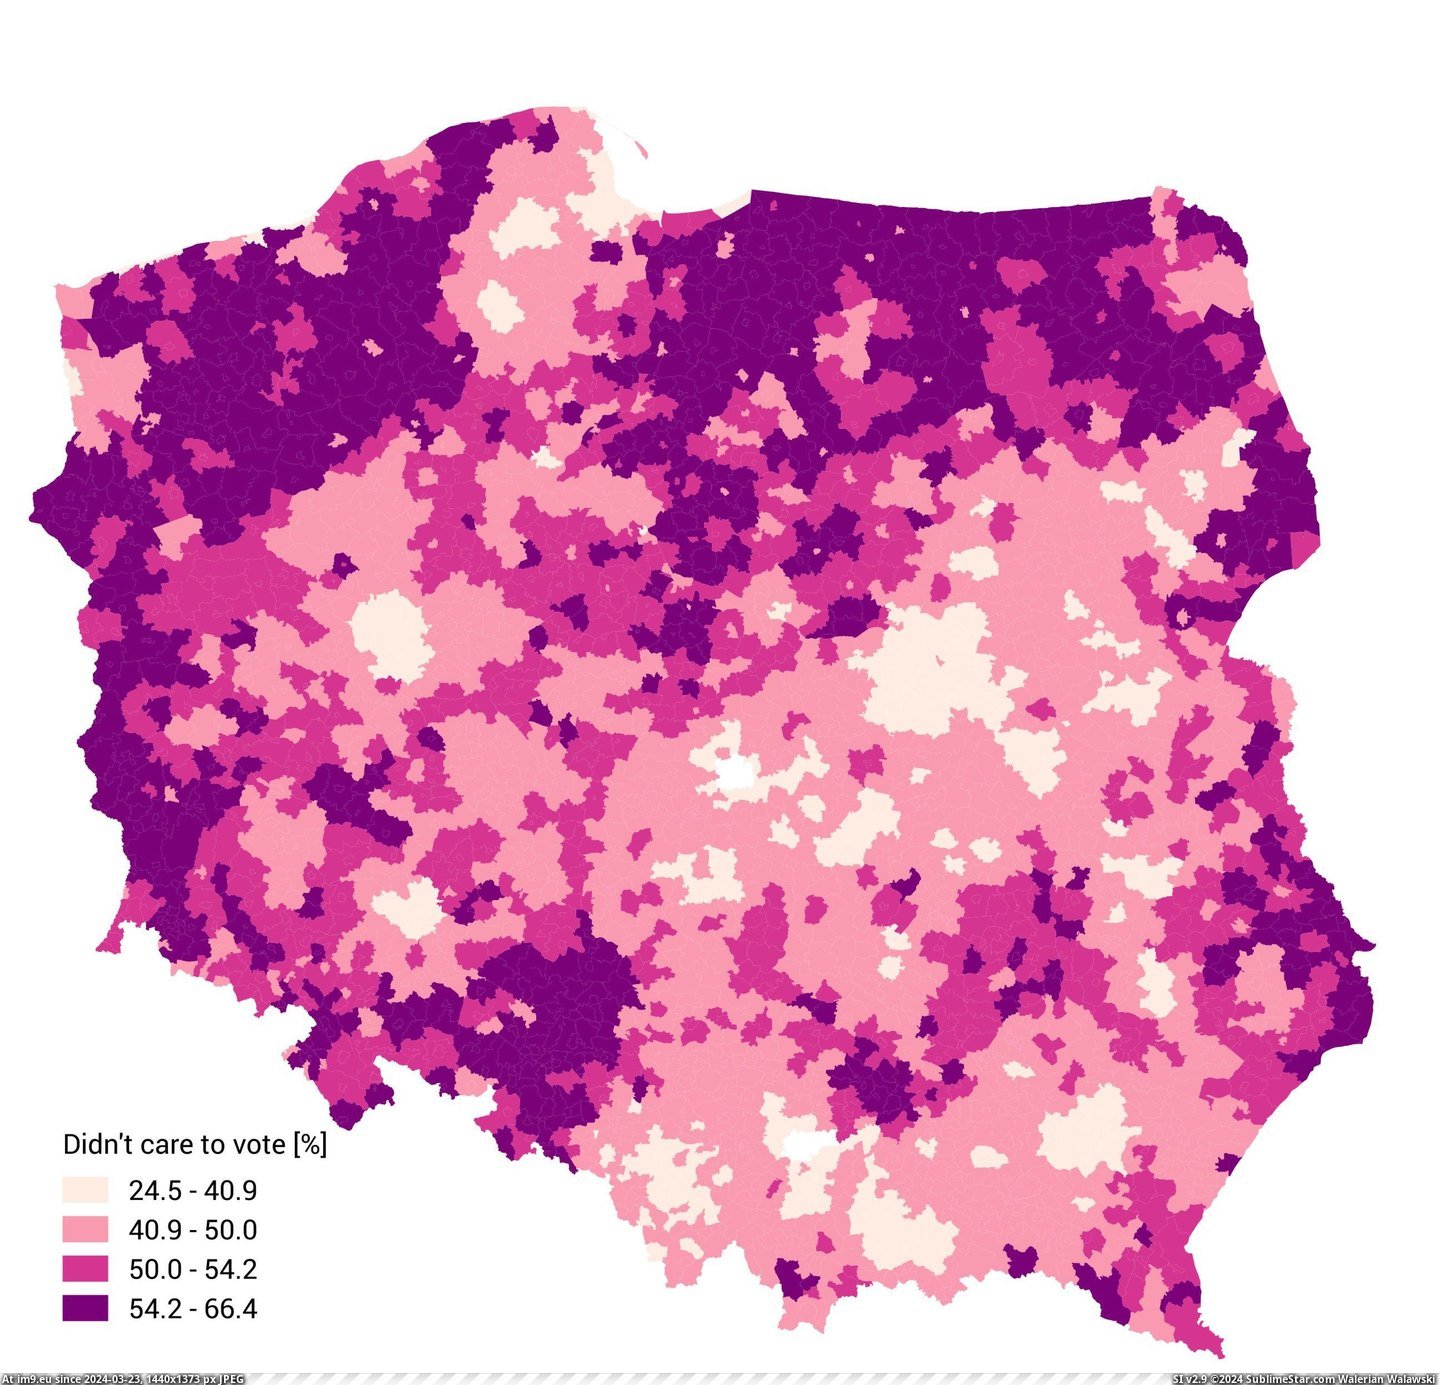 #One #Real #Party #Election #Winner #Sunday #Care #Poland [Mapporn] The real winner of Sunday's election in Poland - No One of the 'I don't care' Party [2589x2480px] Pic. (Bild von album My r/MAPS favs))